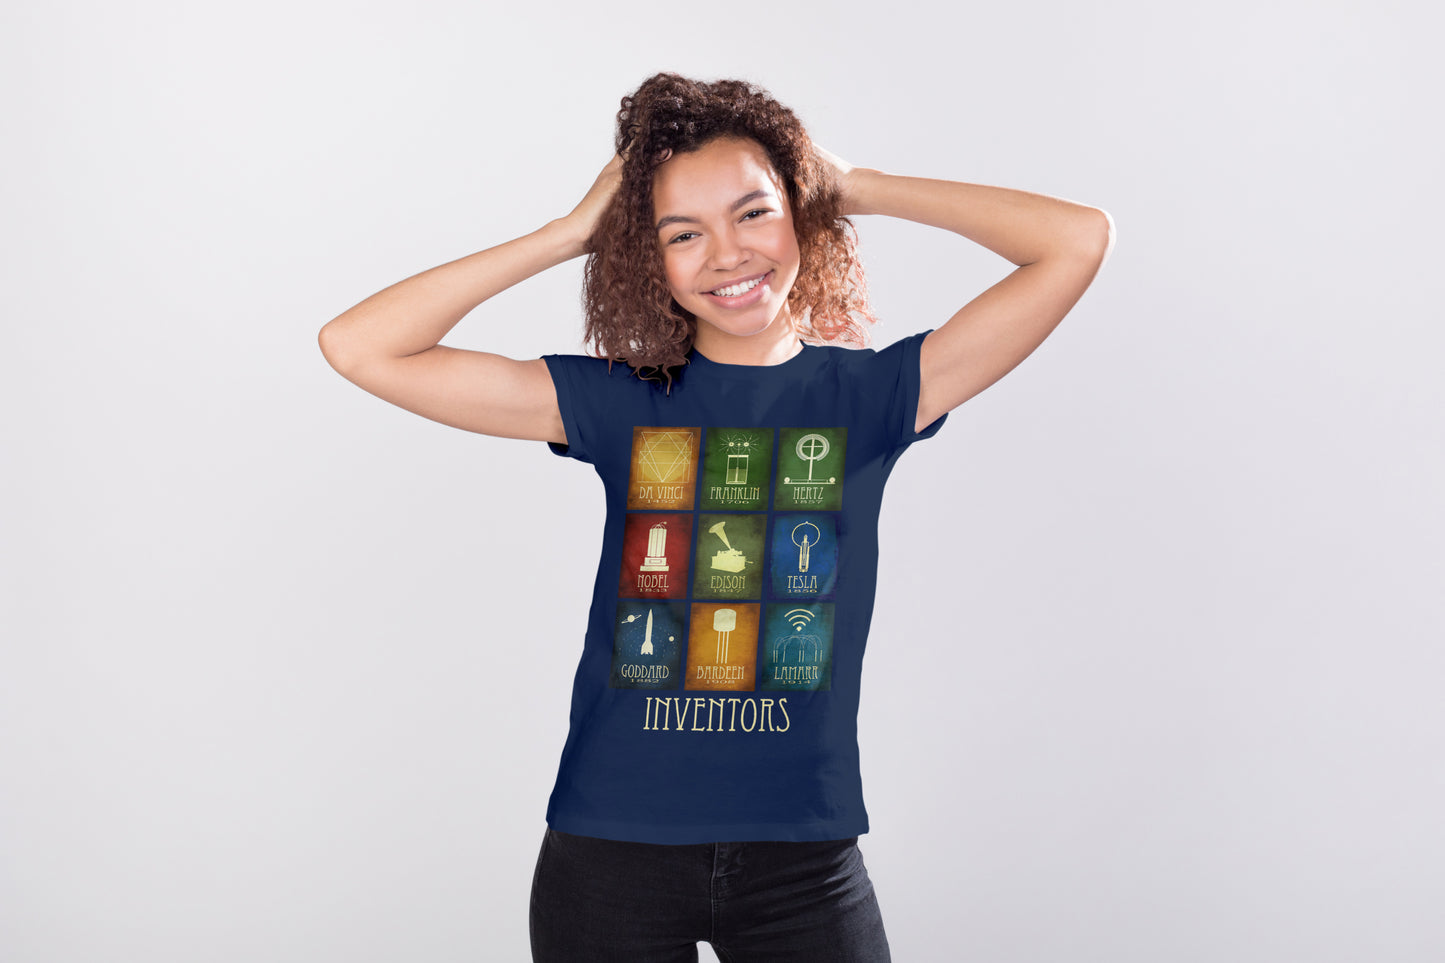 Inventors T-shirt, 9 Famous Genius Scientists in History